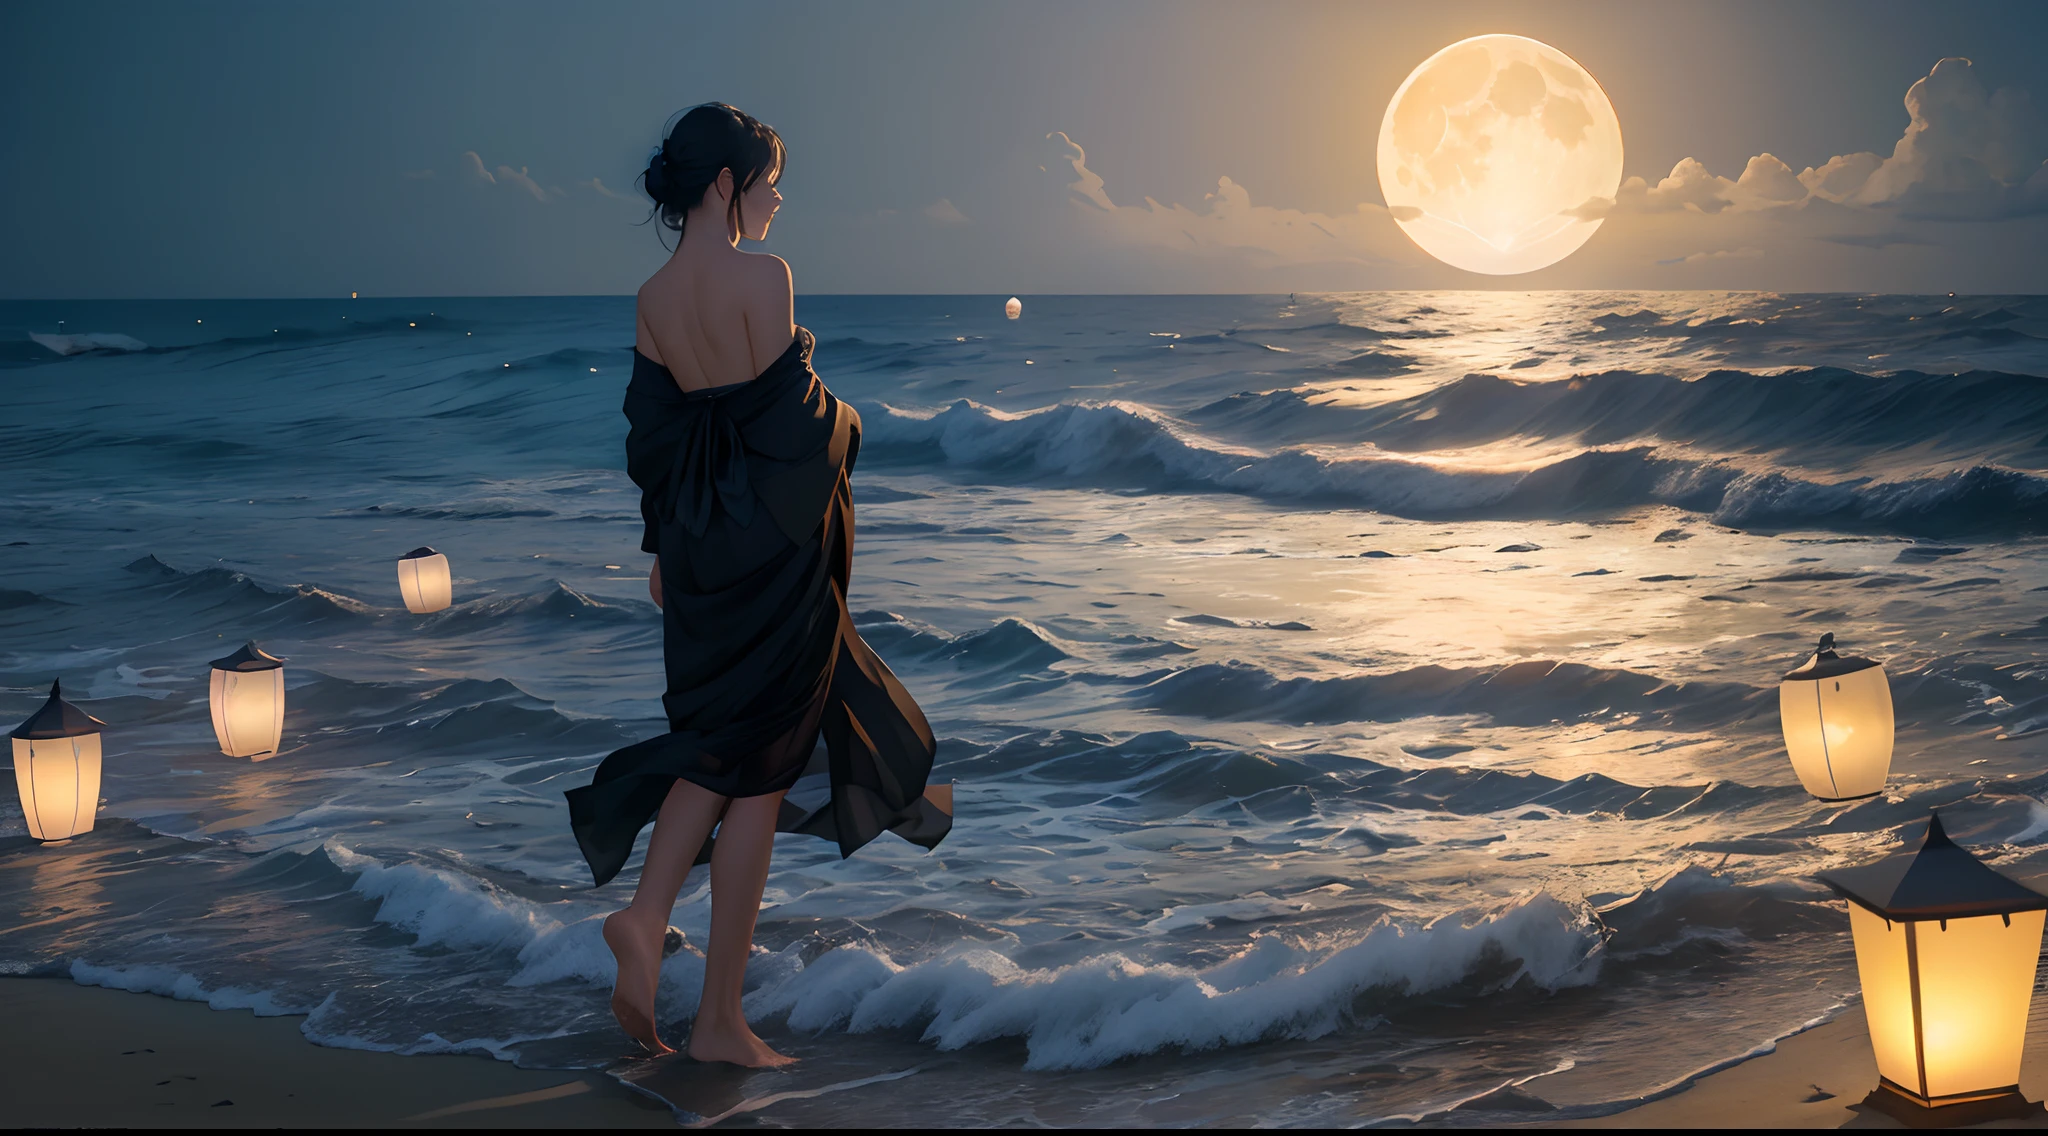 (moonlit night),(on the beach,crashing waves),(dramatic lighting),(silhouettes),(sparkling sand),(peaceful and relaxing atmosphere), 100s of paper lanterns, lots of paper beautiful lanterns, huge moon